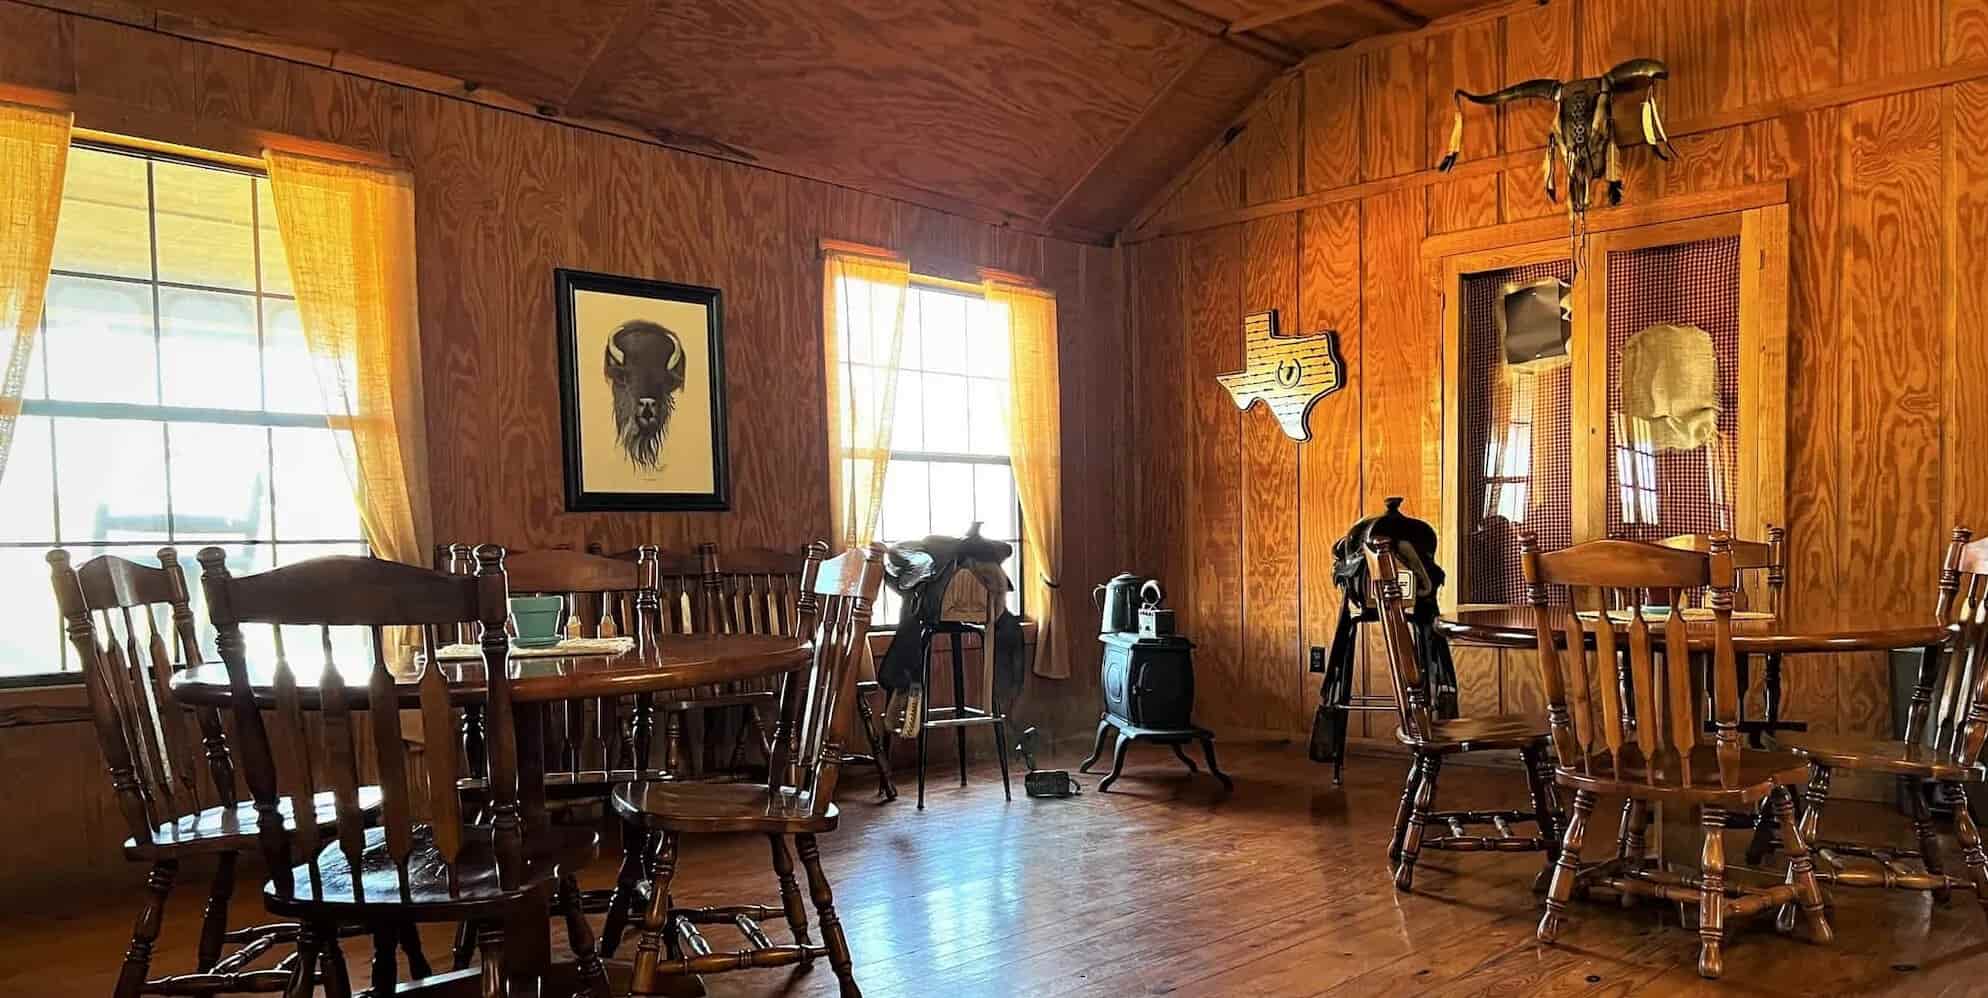 Western themed decorations fill the interior of the West 1077 Guest Ranch lodge